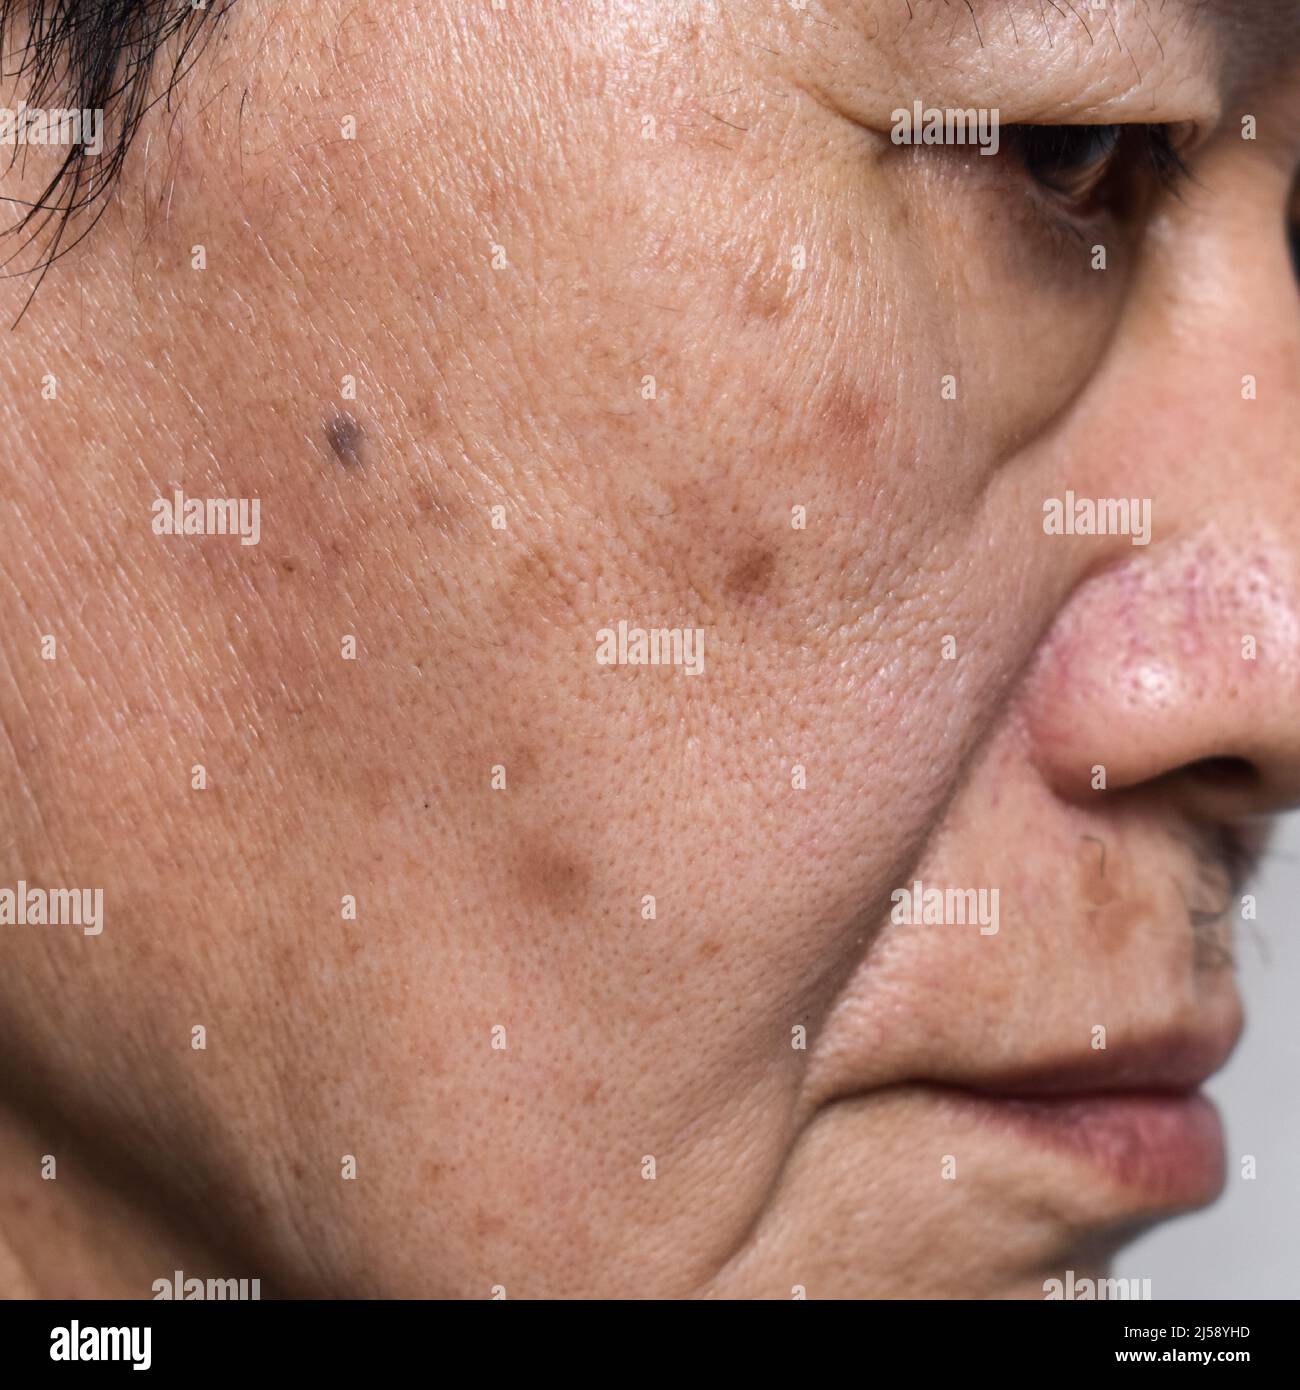 Small brown patches called age spots on face of Asian elder man. They are also called liver spots, senile lentigo, or sun spots. Closeup view. Stock Photo